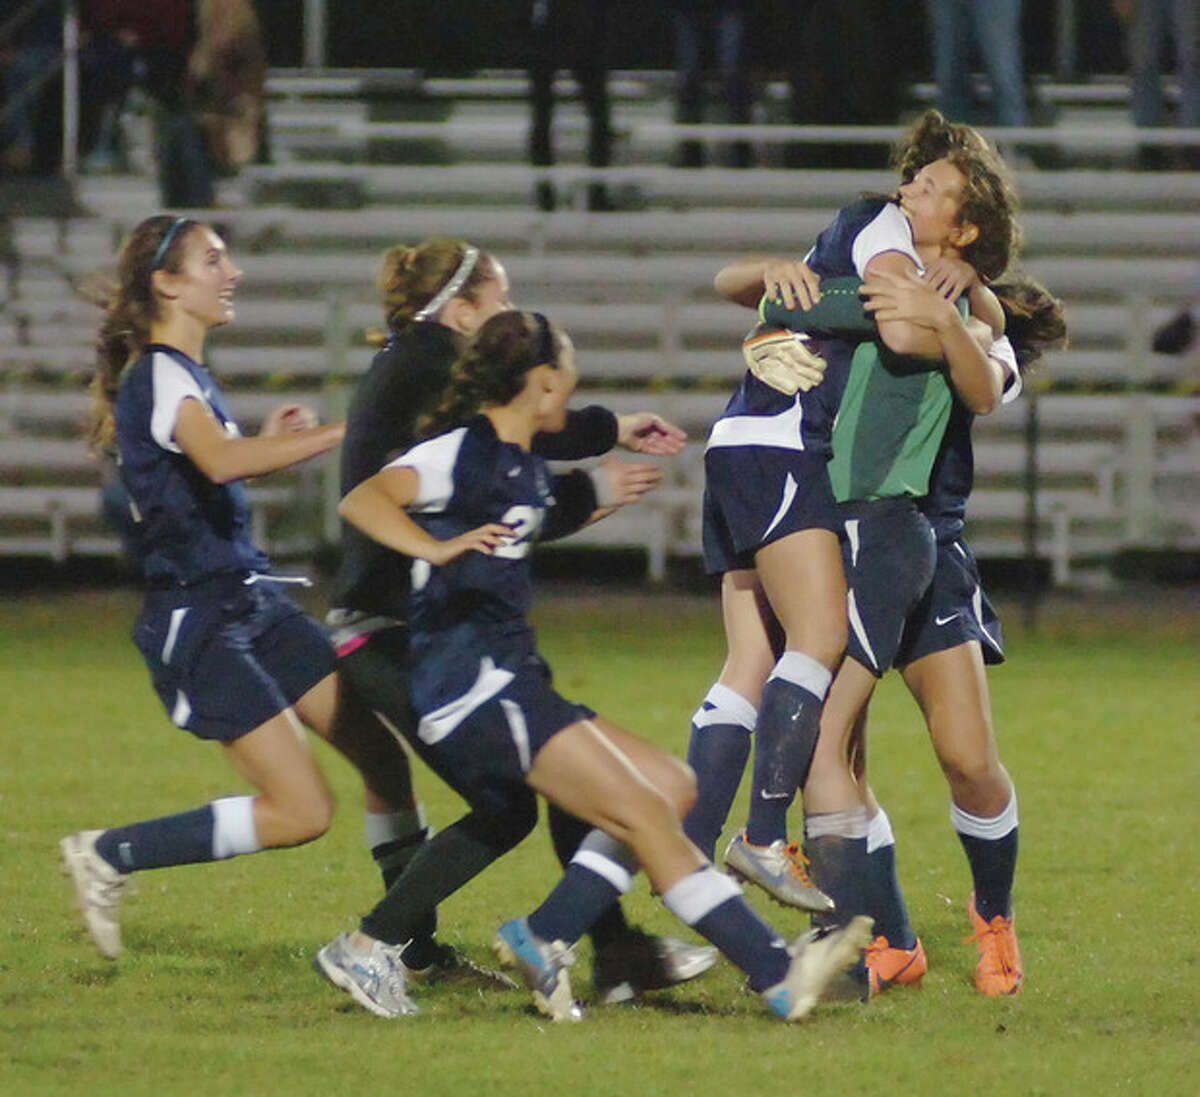 Hour photo/John Nash Wilton goalkeeper Liz Forster, right, embraces teammate Lindsay Knutson as other Warriors rush to celebrate the Warriors 4-2 advantage in penalty kicks, giving them a 2-1 win over Farmington in Monday's second round of the CIAC Class L state tournament.